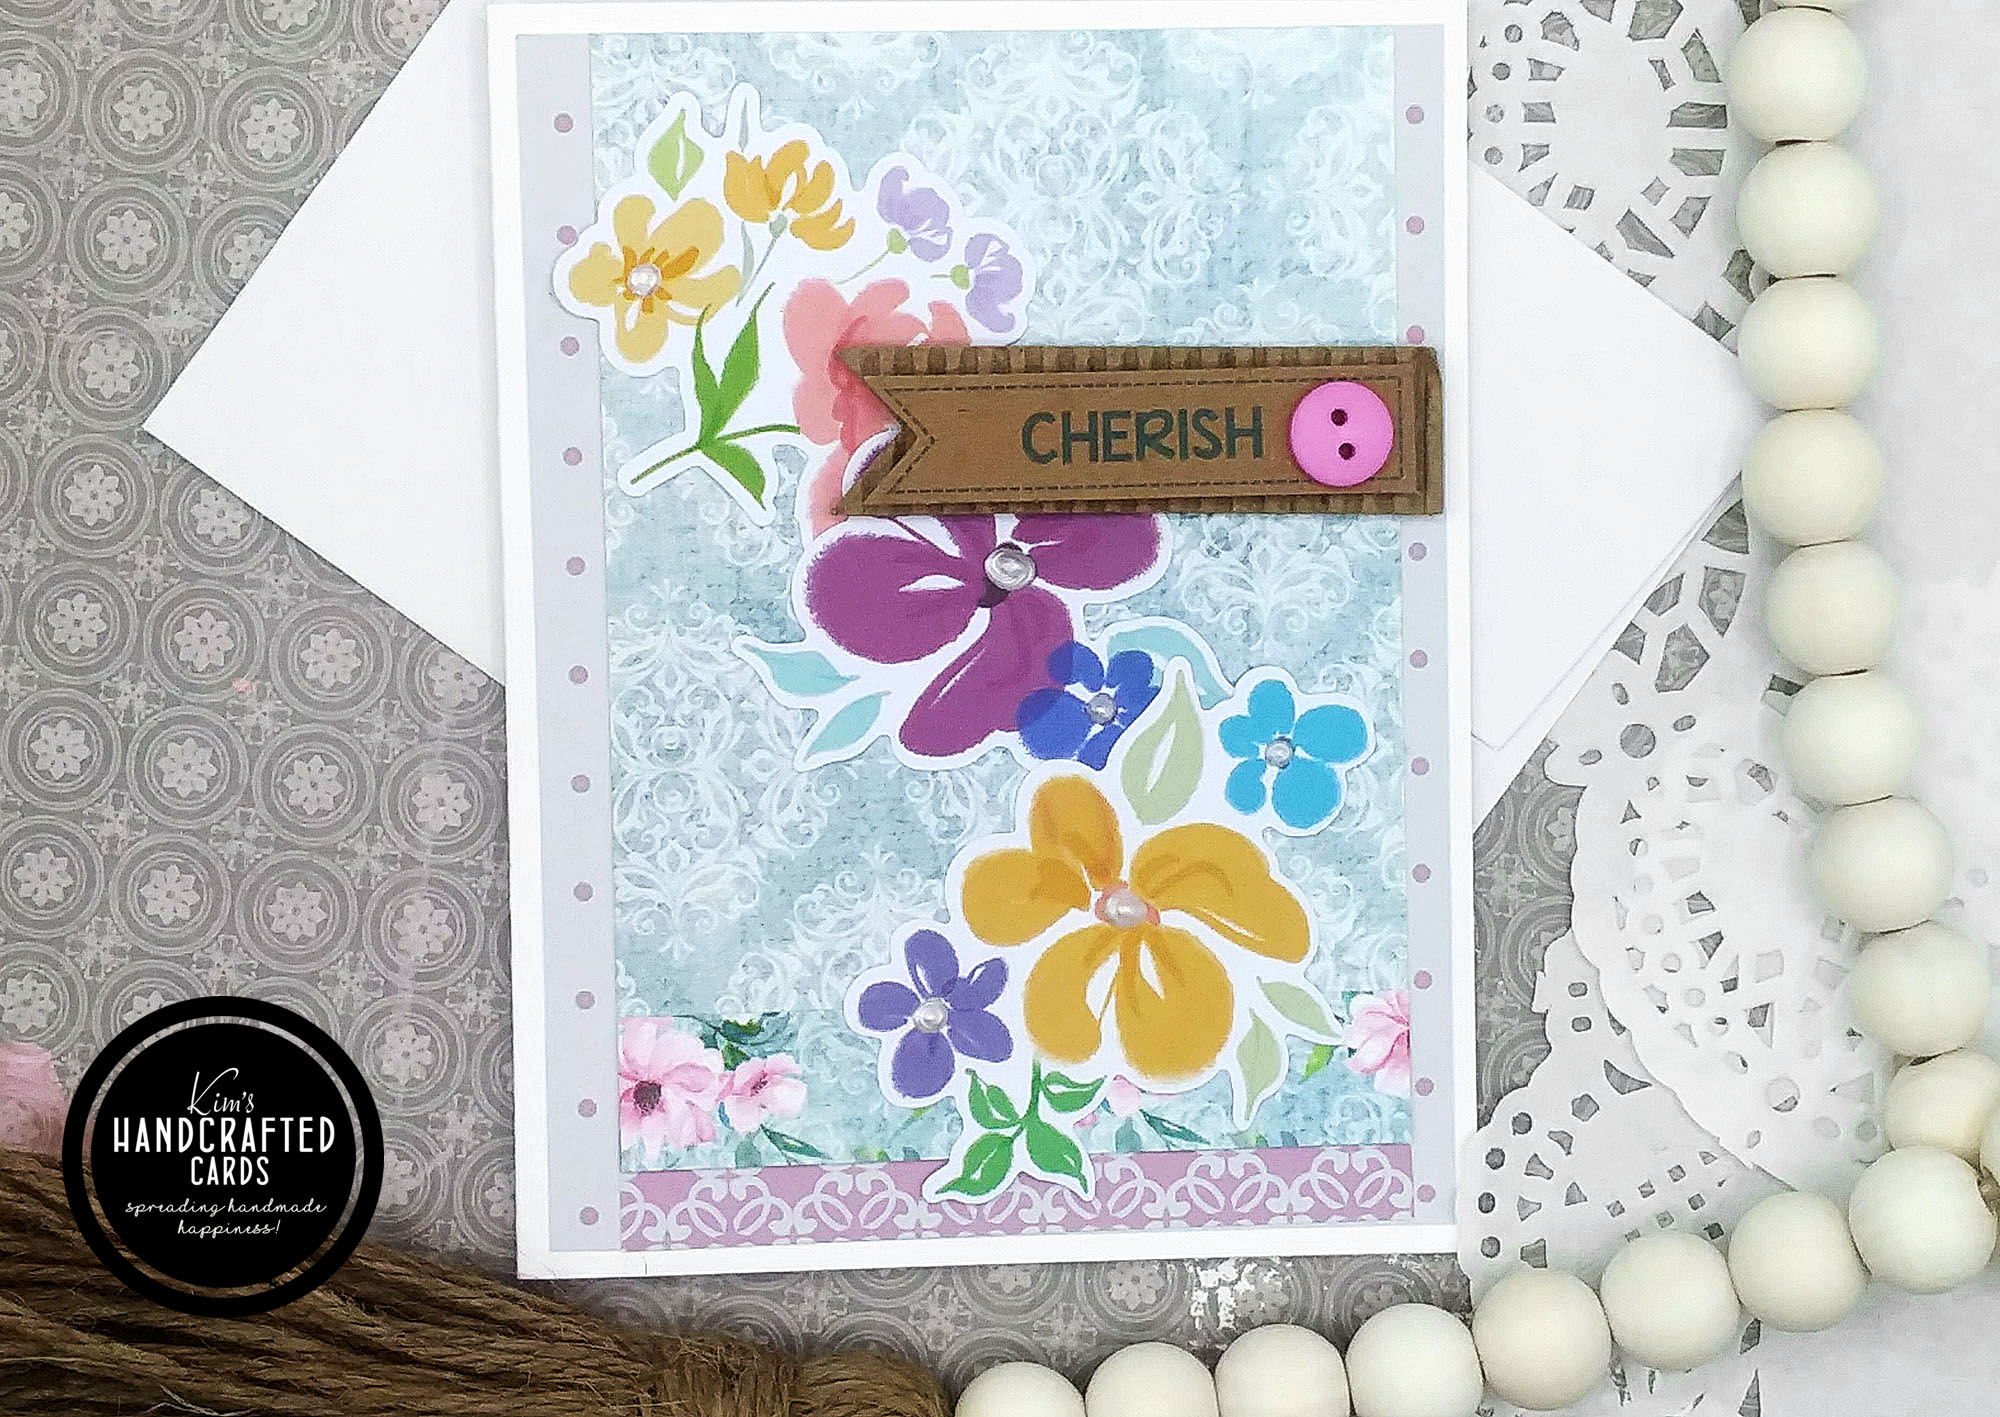 Plain Notecards and Gift Boxes with Patterned Papers